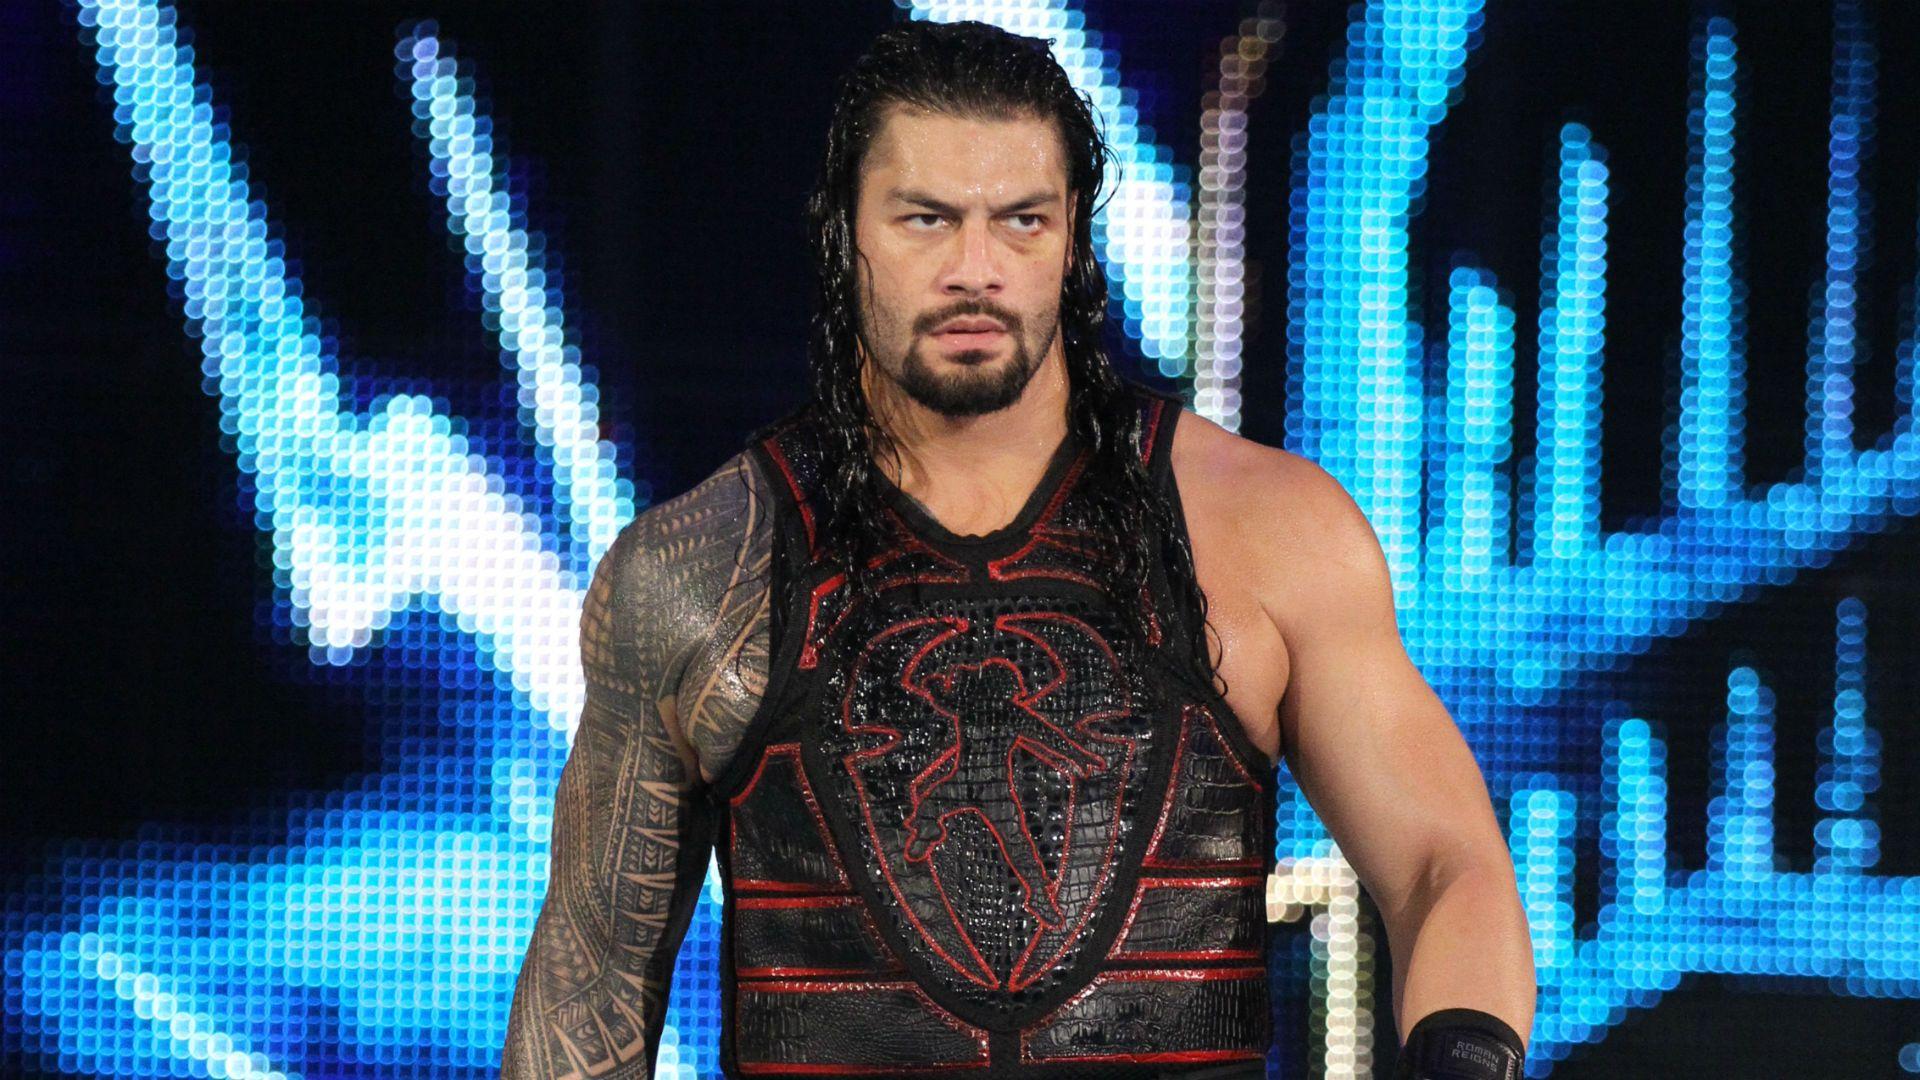 The Big Dog is back: Roman Reigns announces WWE return after